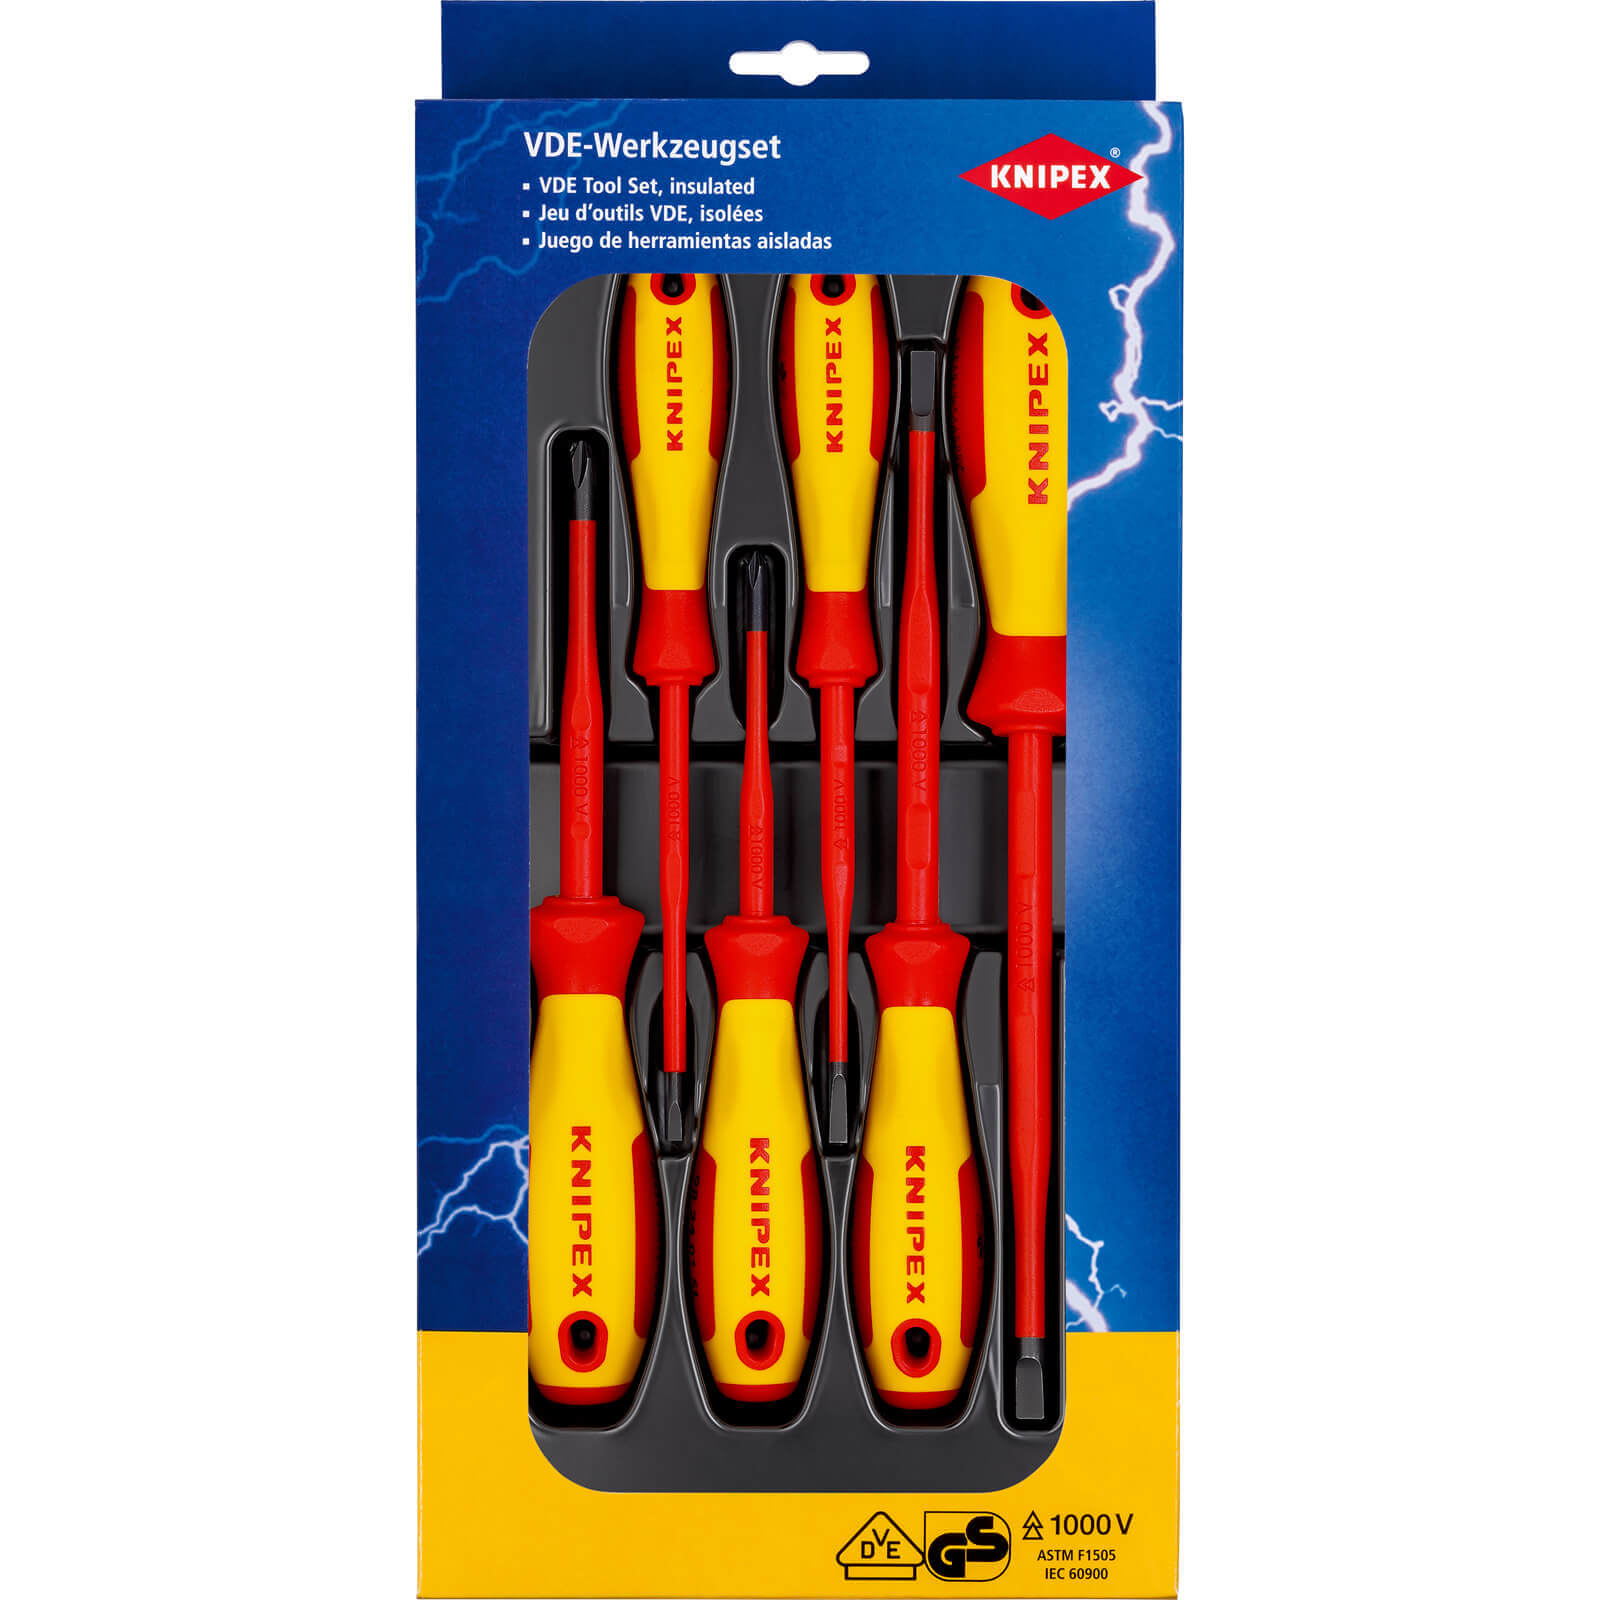 Image of Knipex 6 Piece VDE Insulated Screwdriver Set